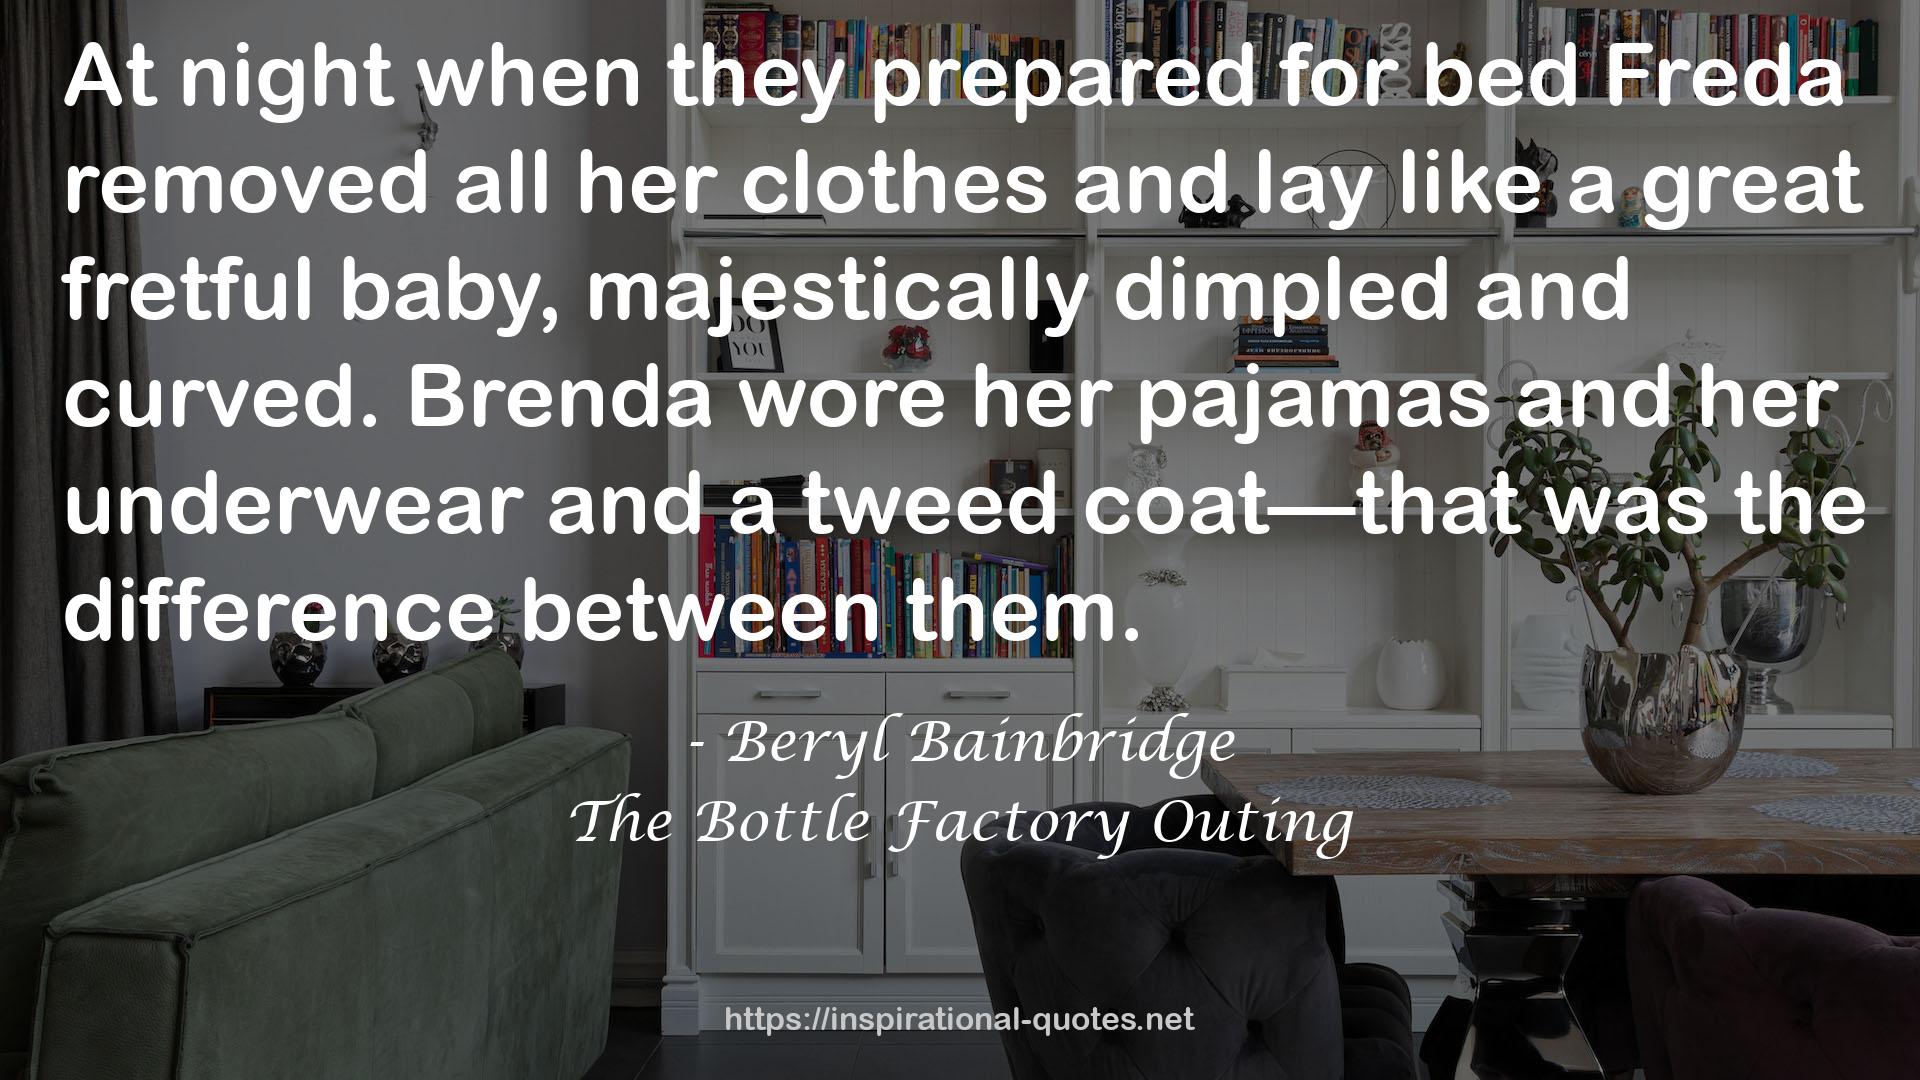 The Bottle Factory Outing QUOTES